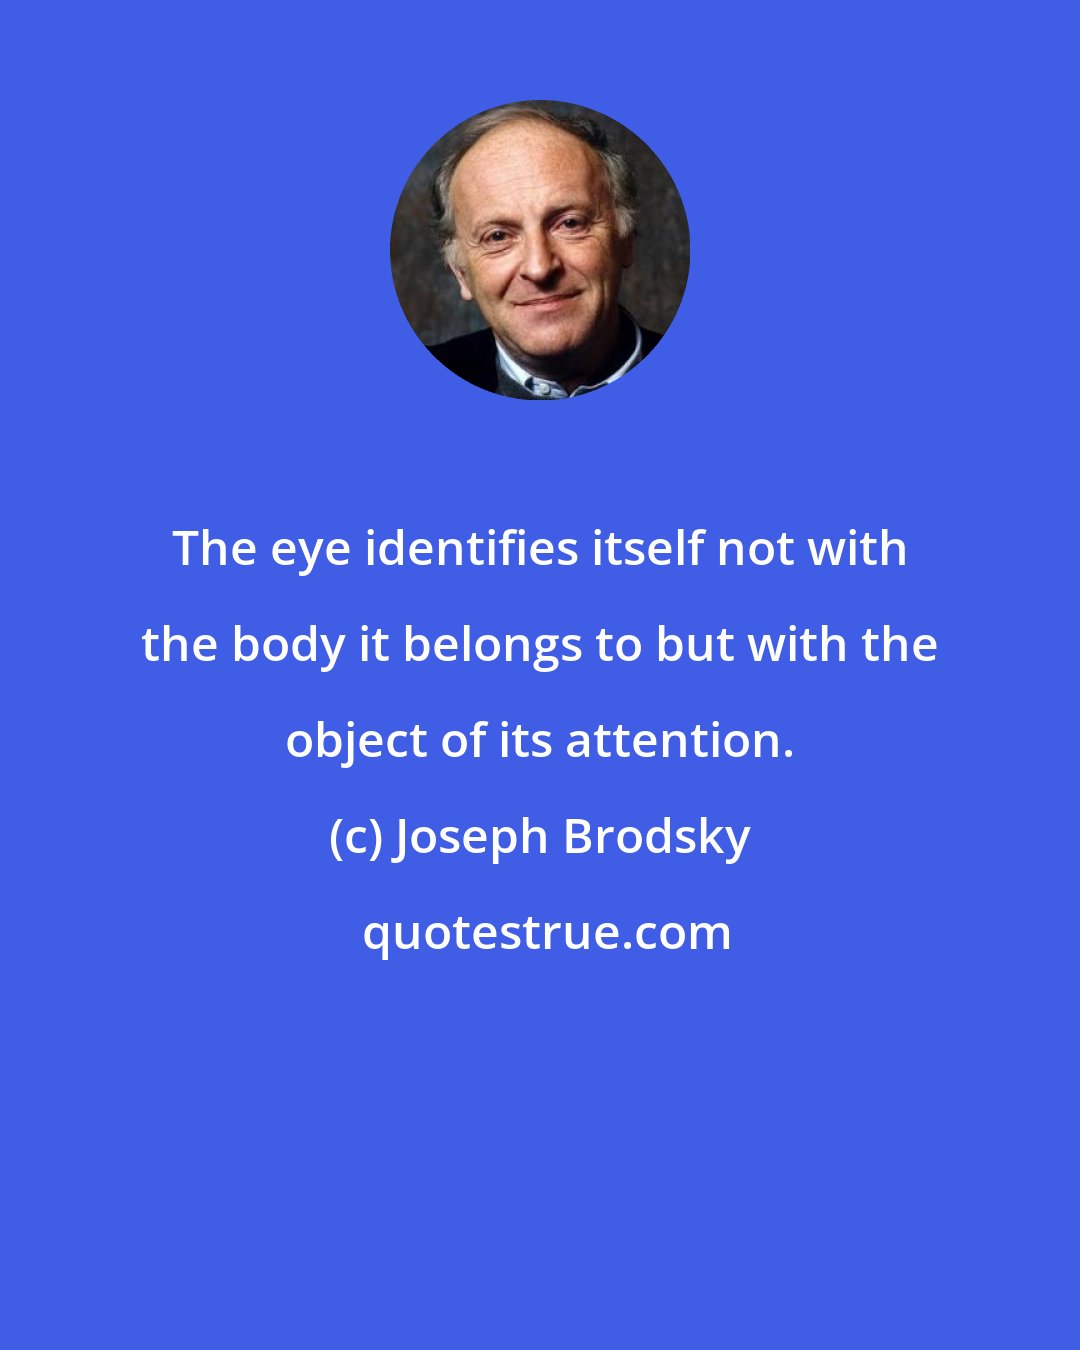 Joseph Brodsky: The eye identifies itself not with the body it belongs to but with the object of its attention.